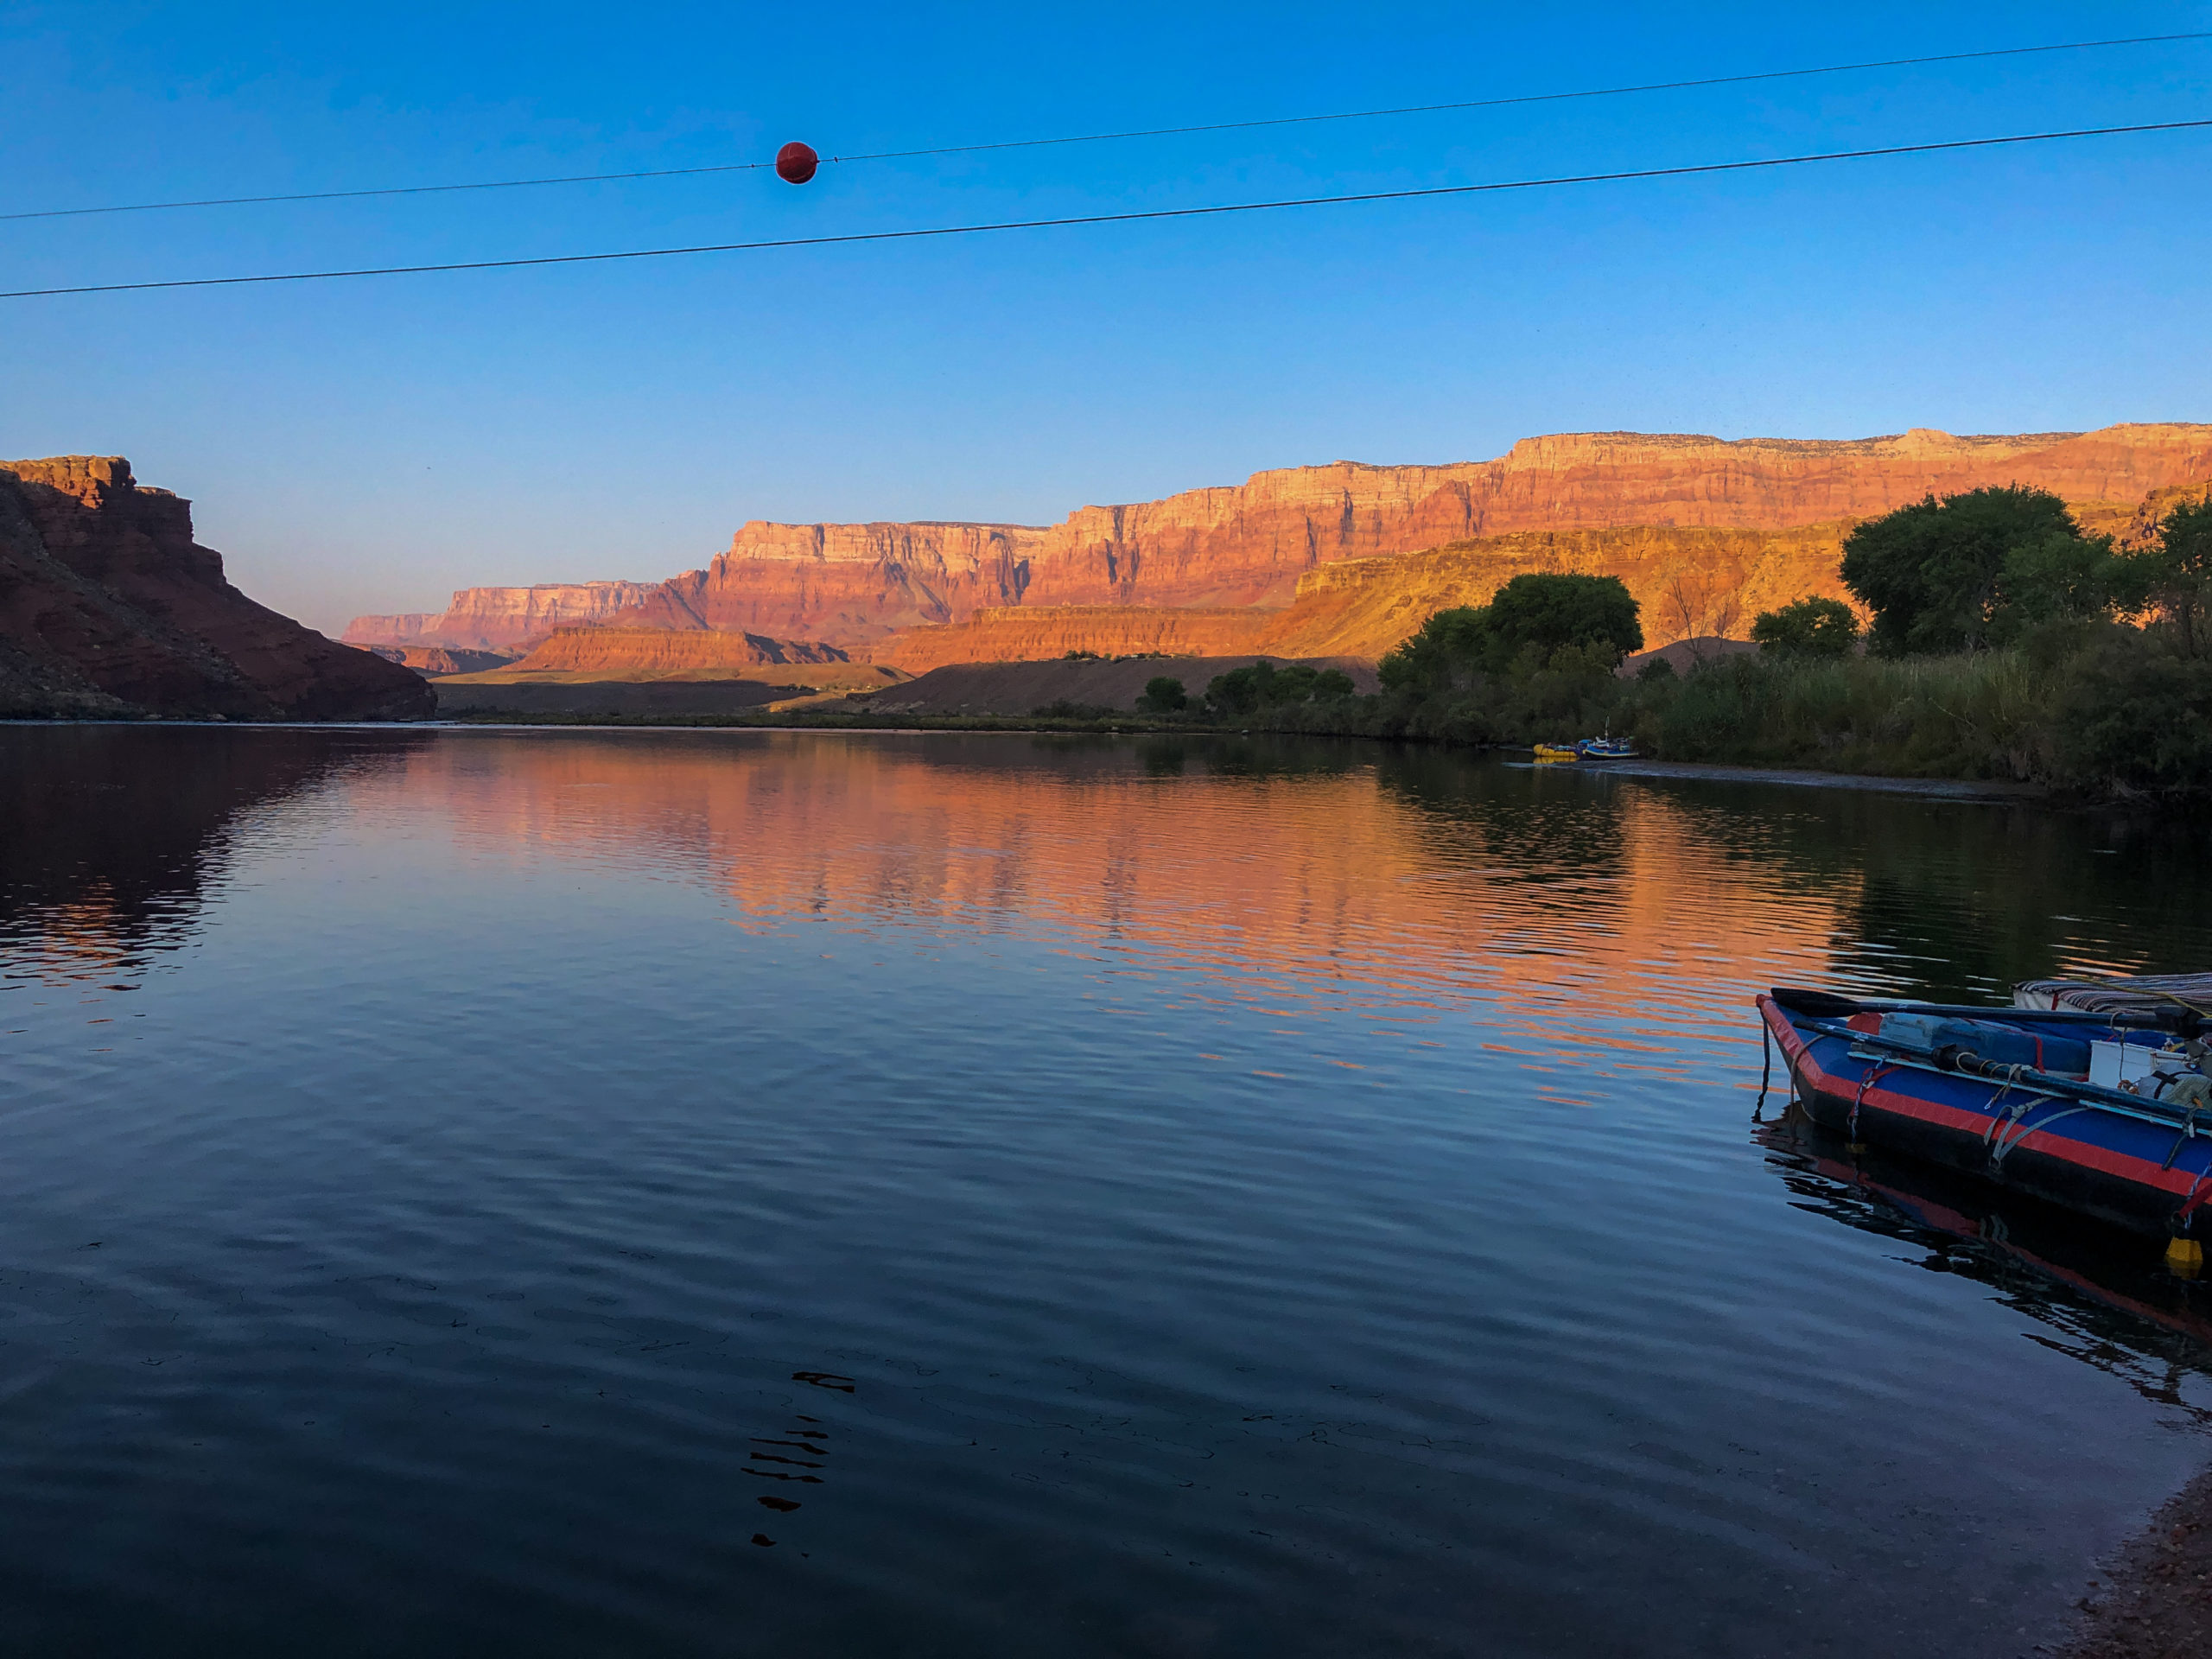 Looking downstream from Lees Ferry, Arizona, on Sept. 24. The location is the only place for hundreds of miles with direct access to the Colorado River. John Doyle Lee used a ferry to shuttle settlers across the river in the mid-1900s. The site is now used as a launching spot for rafters who plan to voyage through the Grand Canyon. Photo credit: Denver Water.